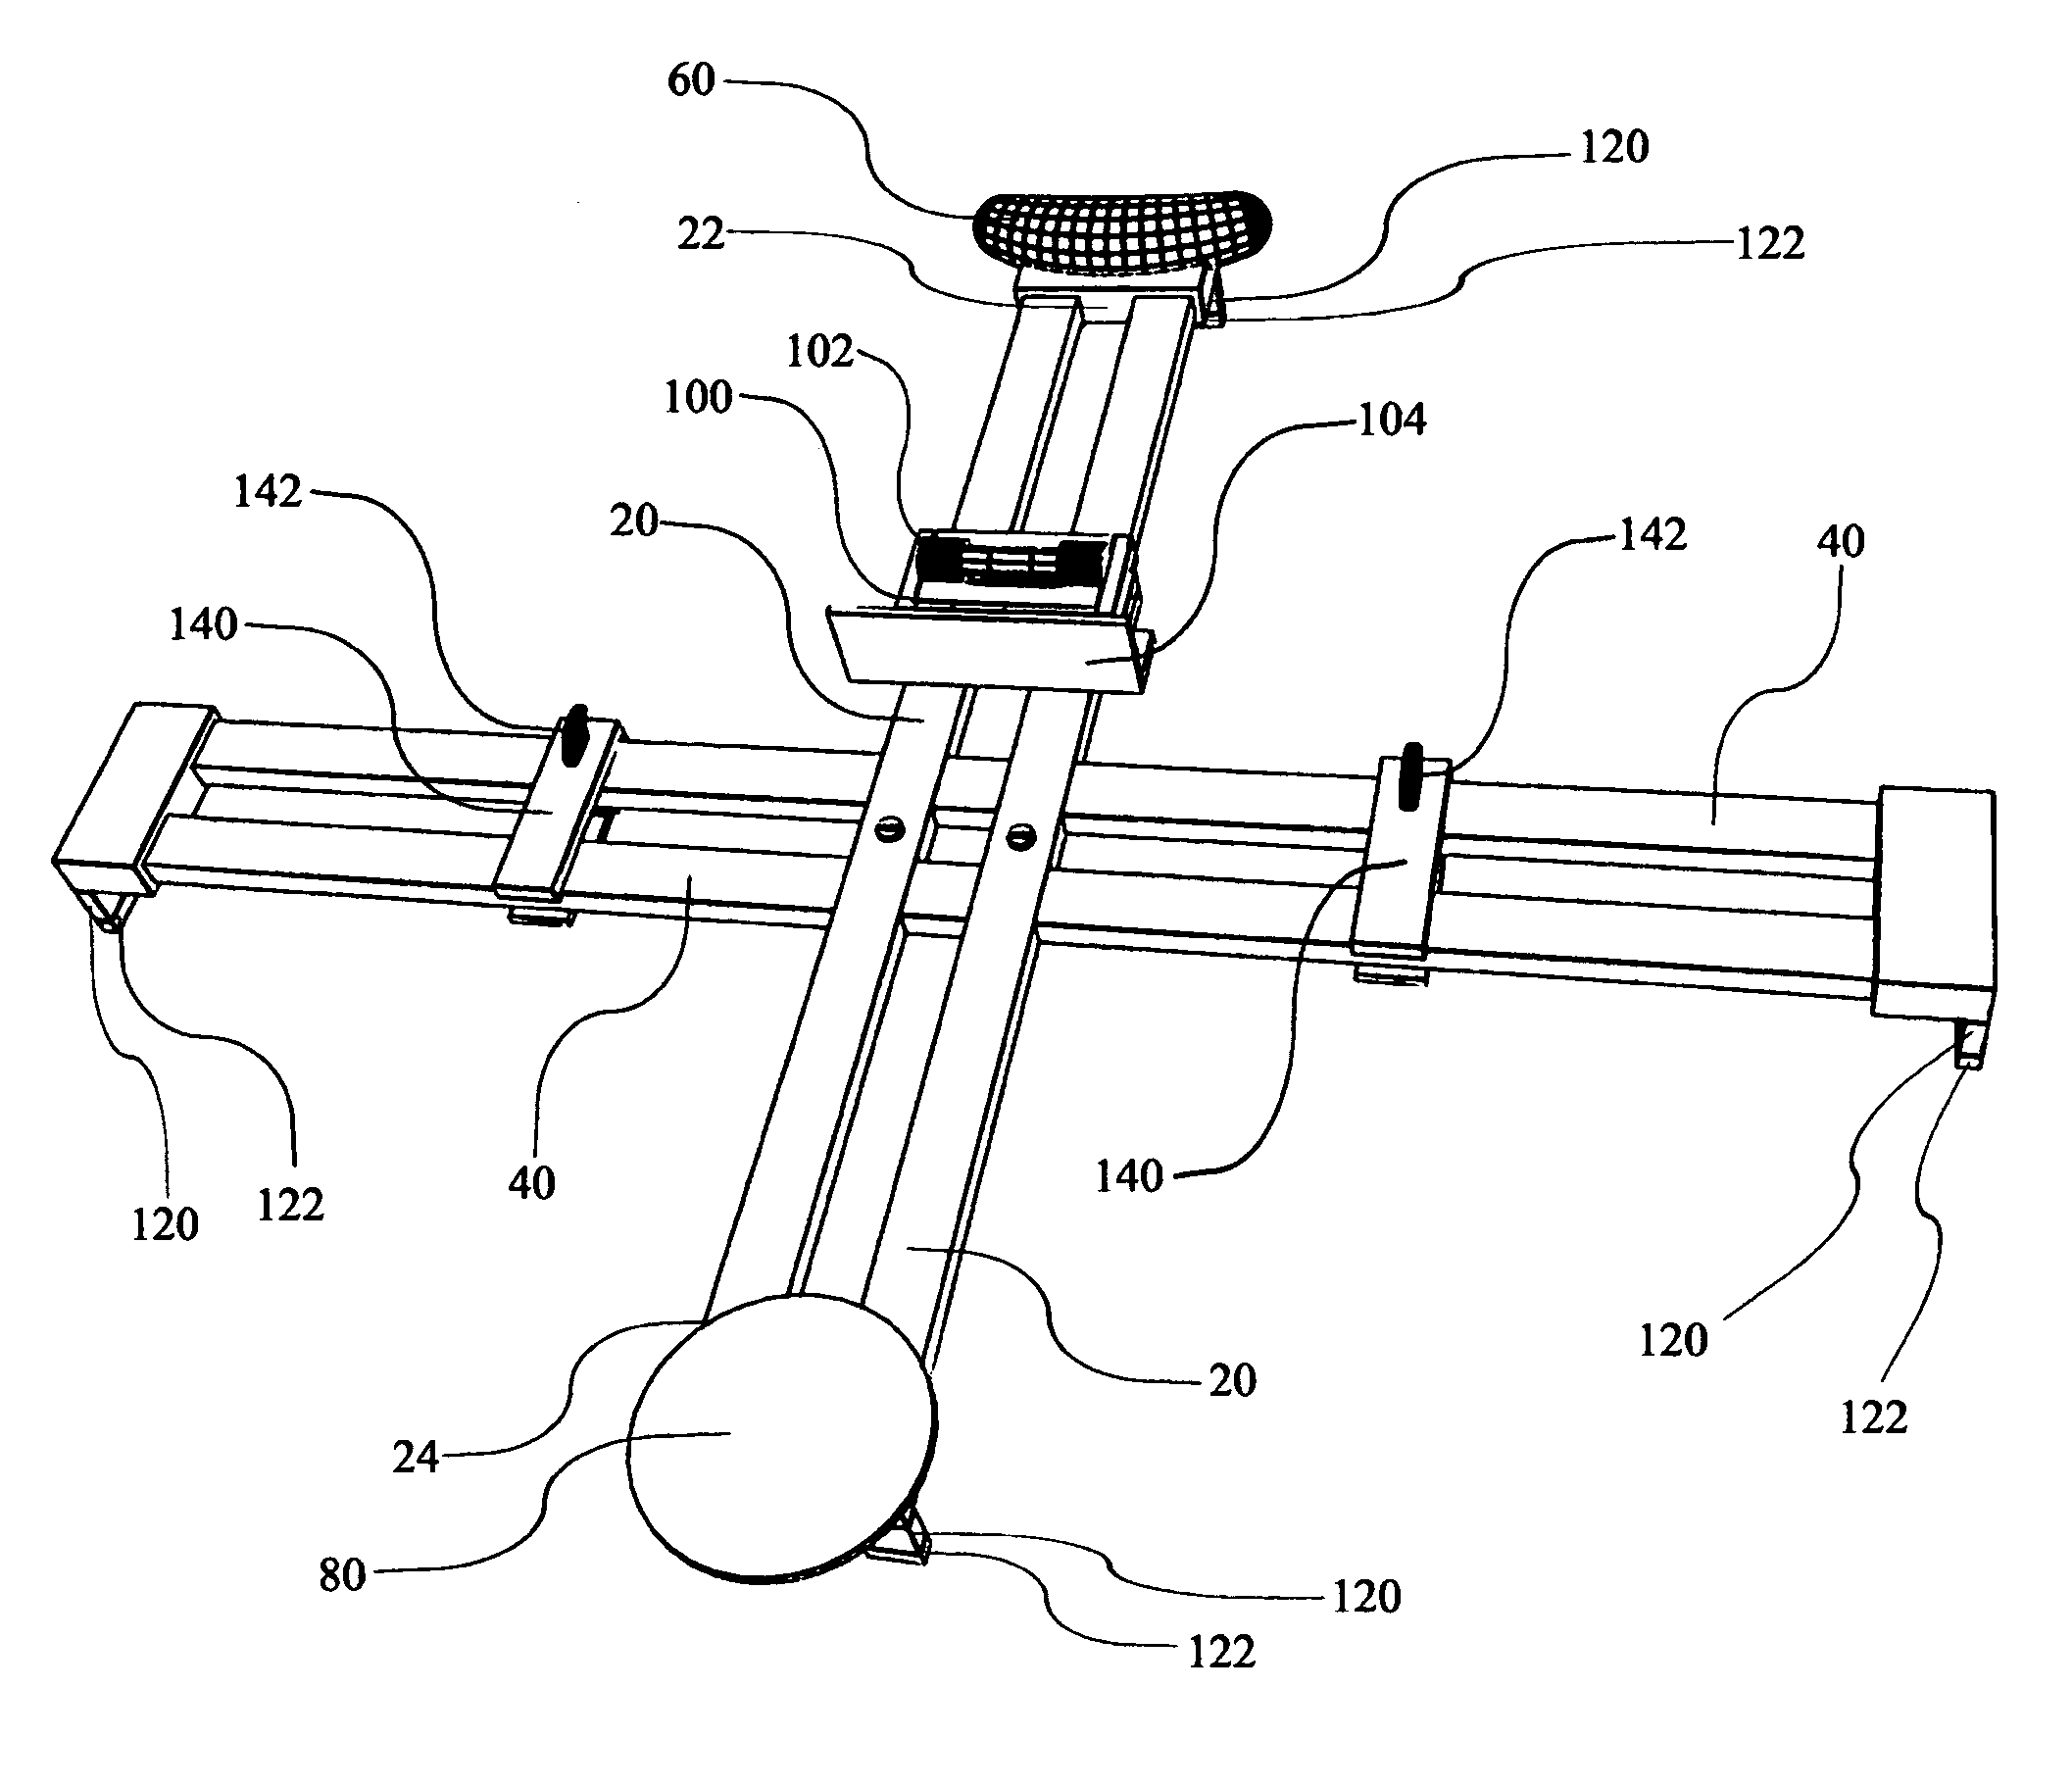 Device for mounting decorative and functional items